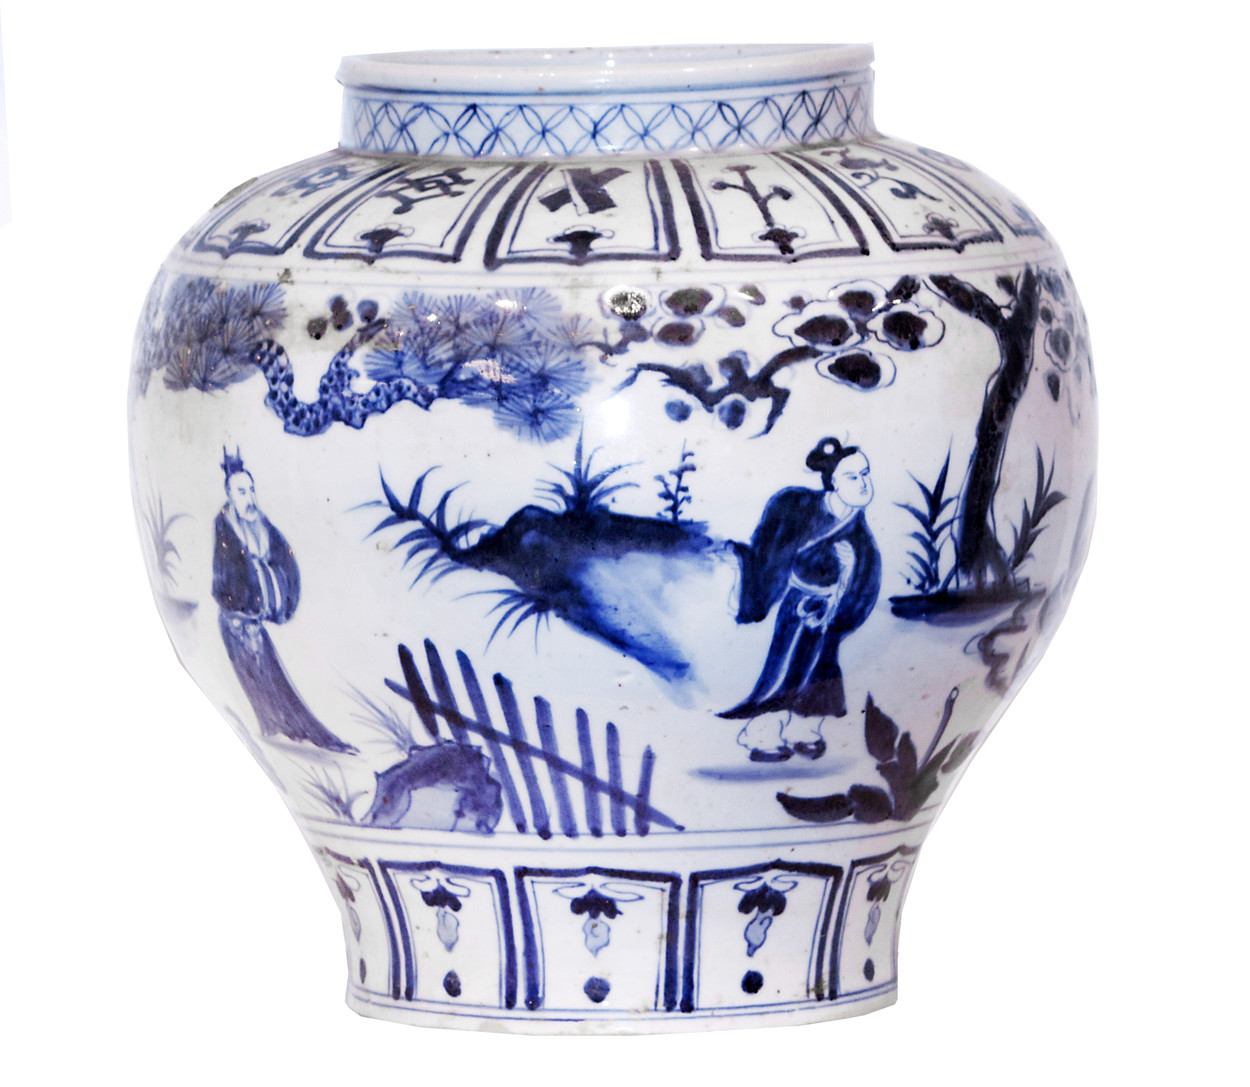 21 Lovable Blue and White Jars and Vases 2023 free download blue and white jars and vases of blue and white china blue and white chinese porcelain orient house inside blue and white vase size n a